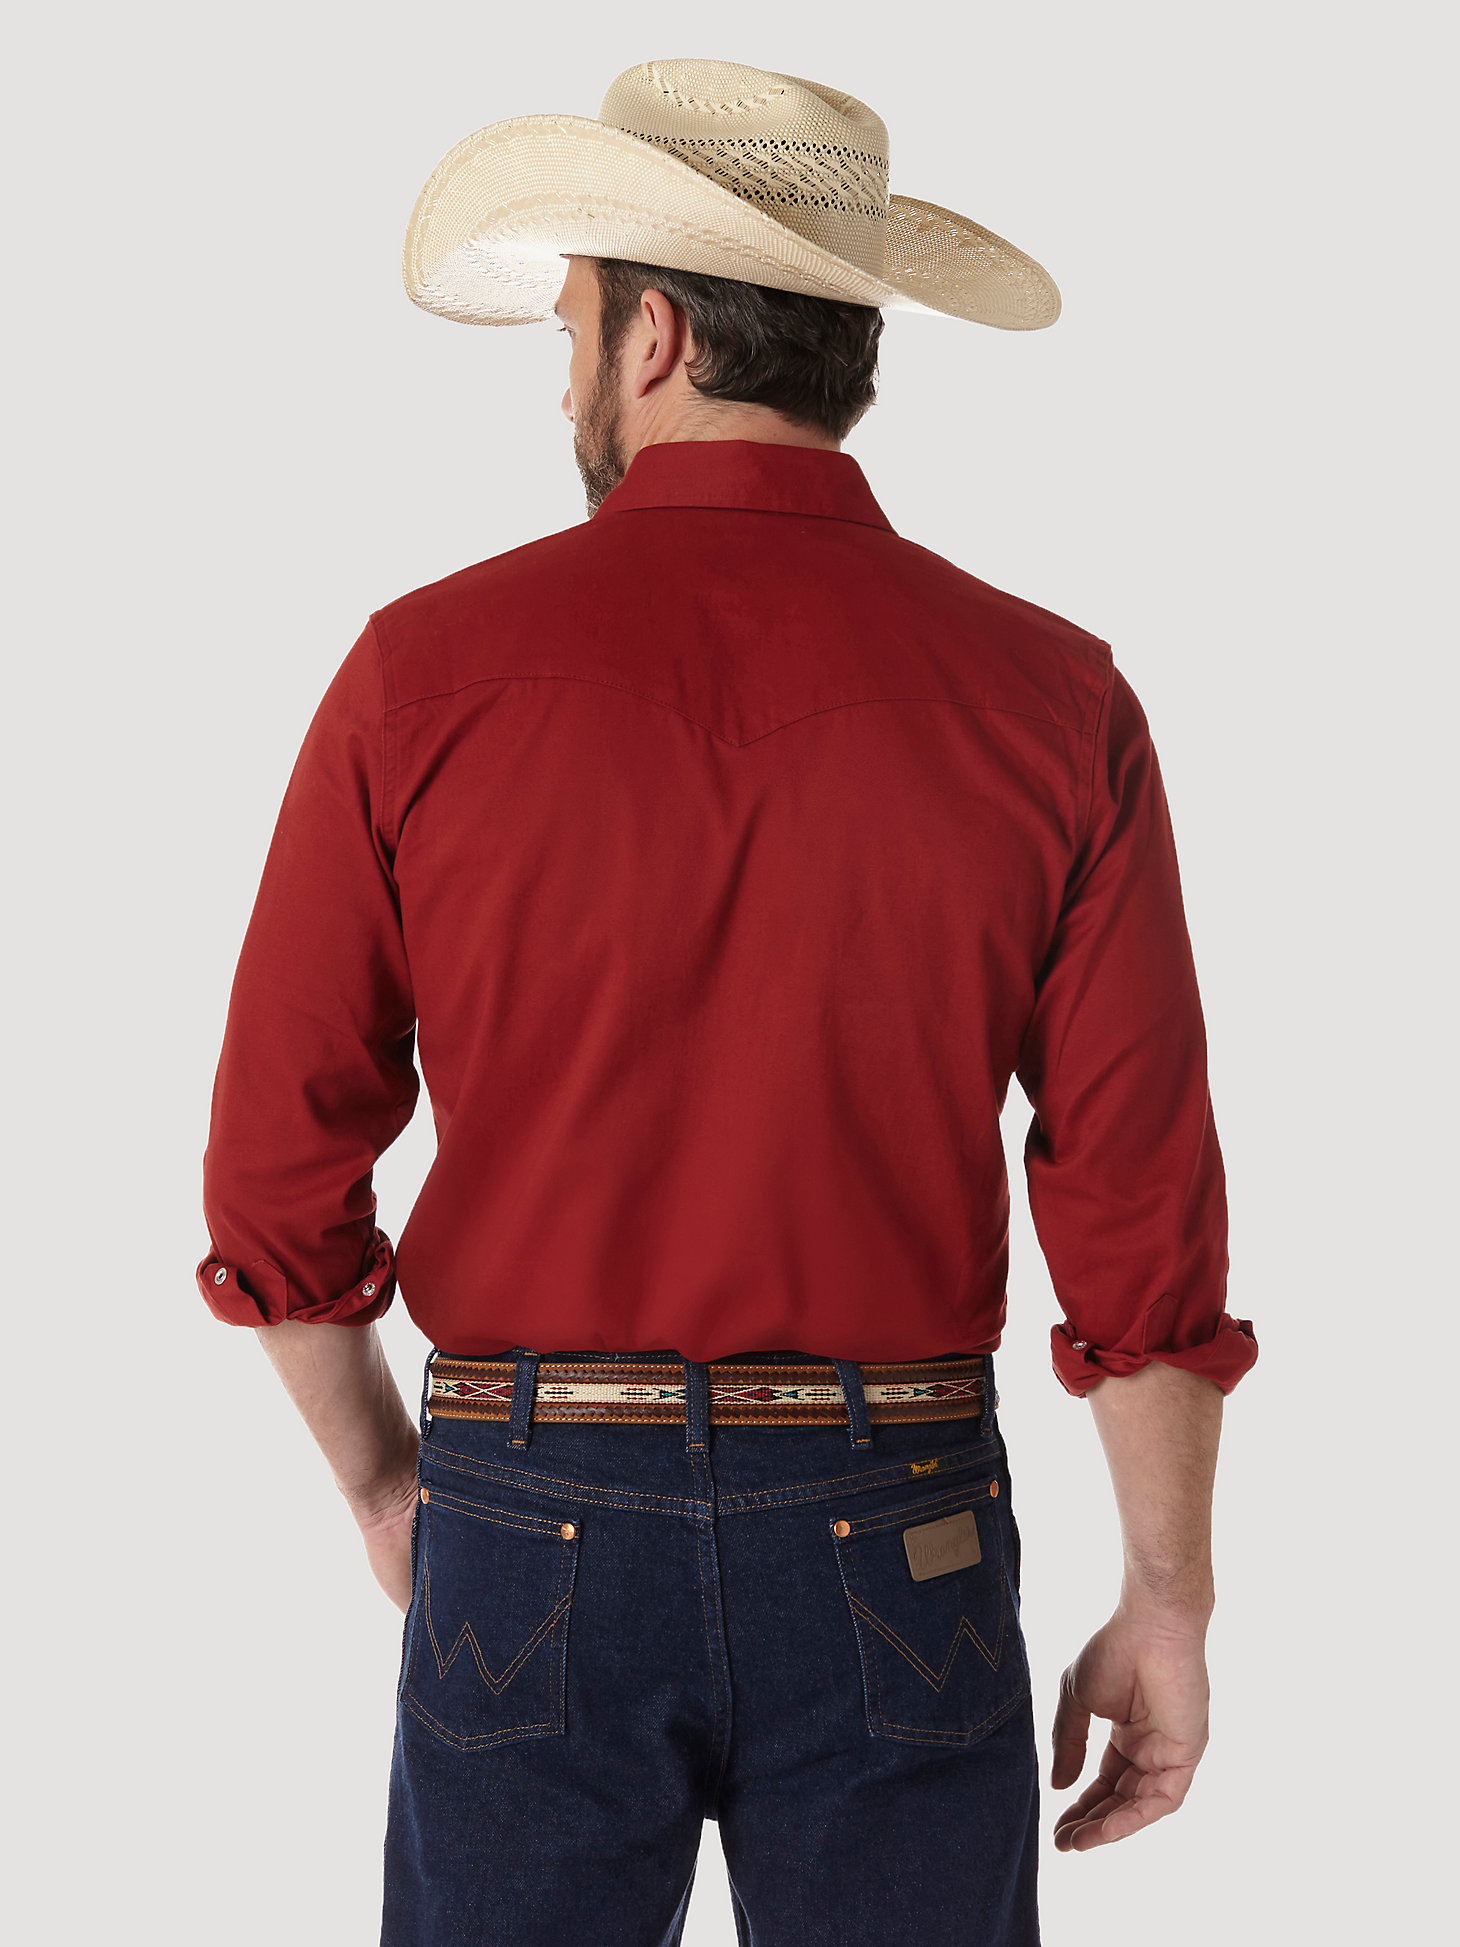 Premium Performance Advanced Comfort Cowboy Cut® Long Sleeve Spread Collar Solid Shirt in Red alternative view 4